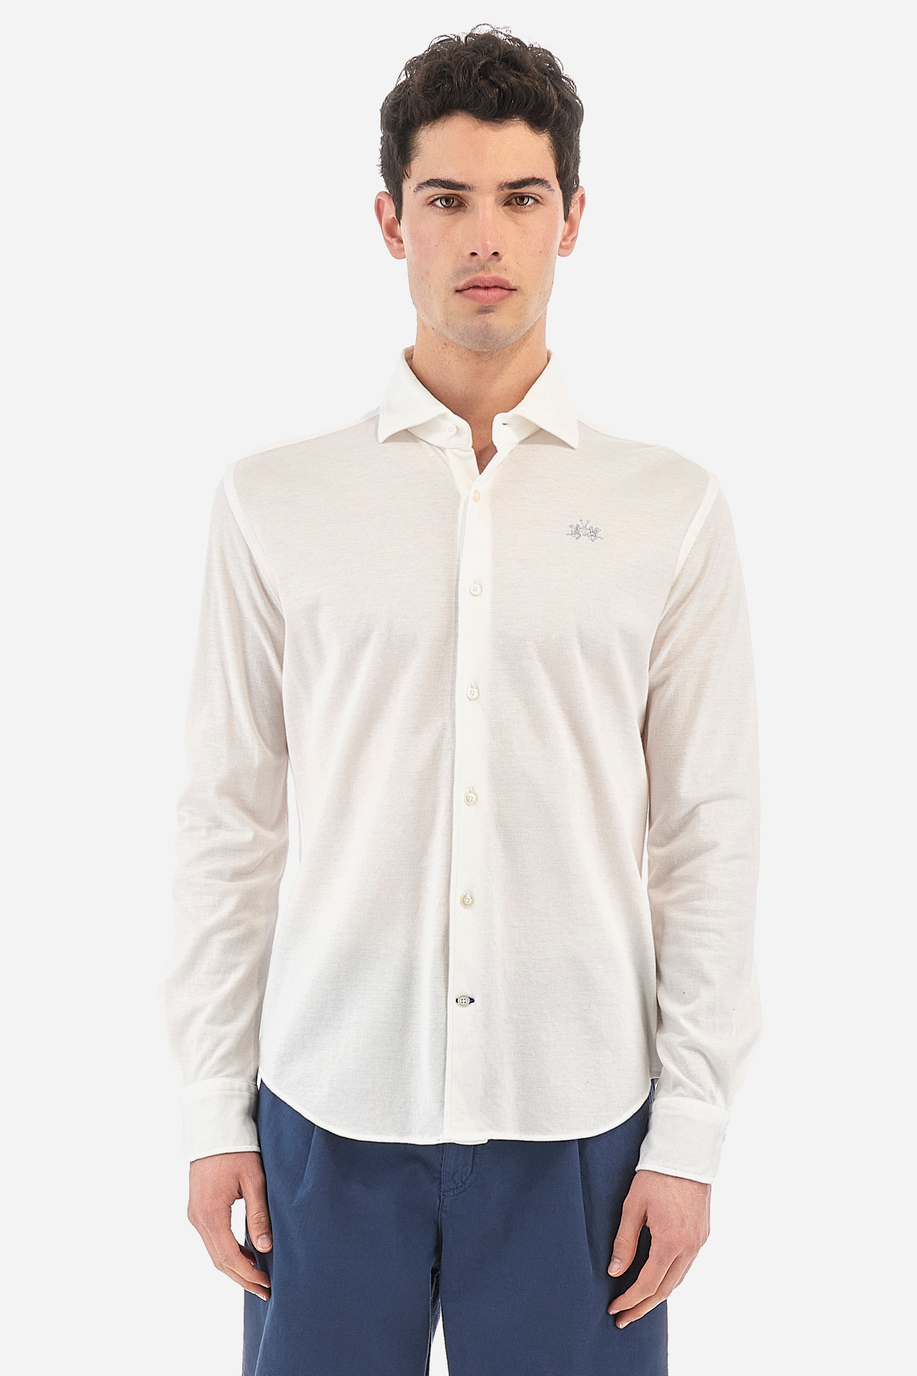 Long-sleeved shirt in cotton piqué, fitted cut for men - Qalam - Capsule | La Martina - Official Online Shop